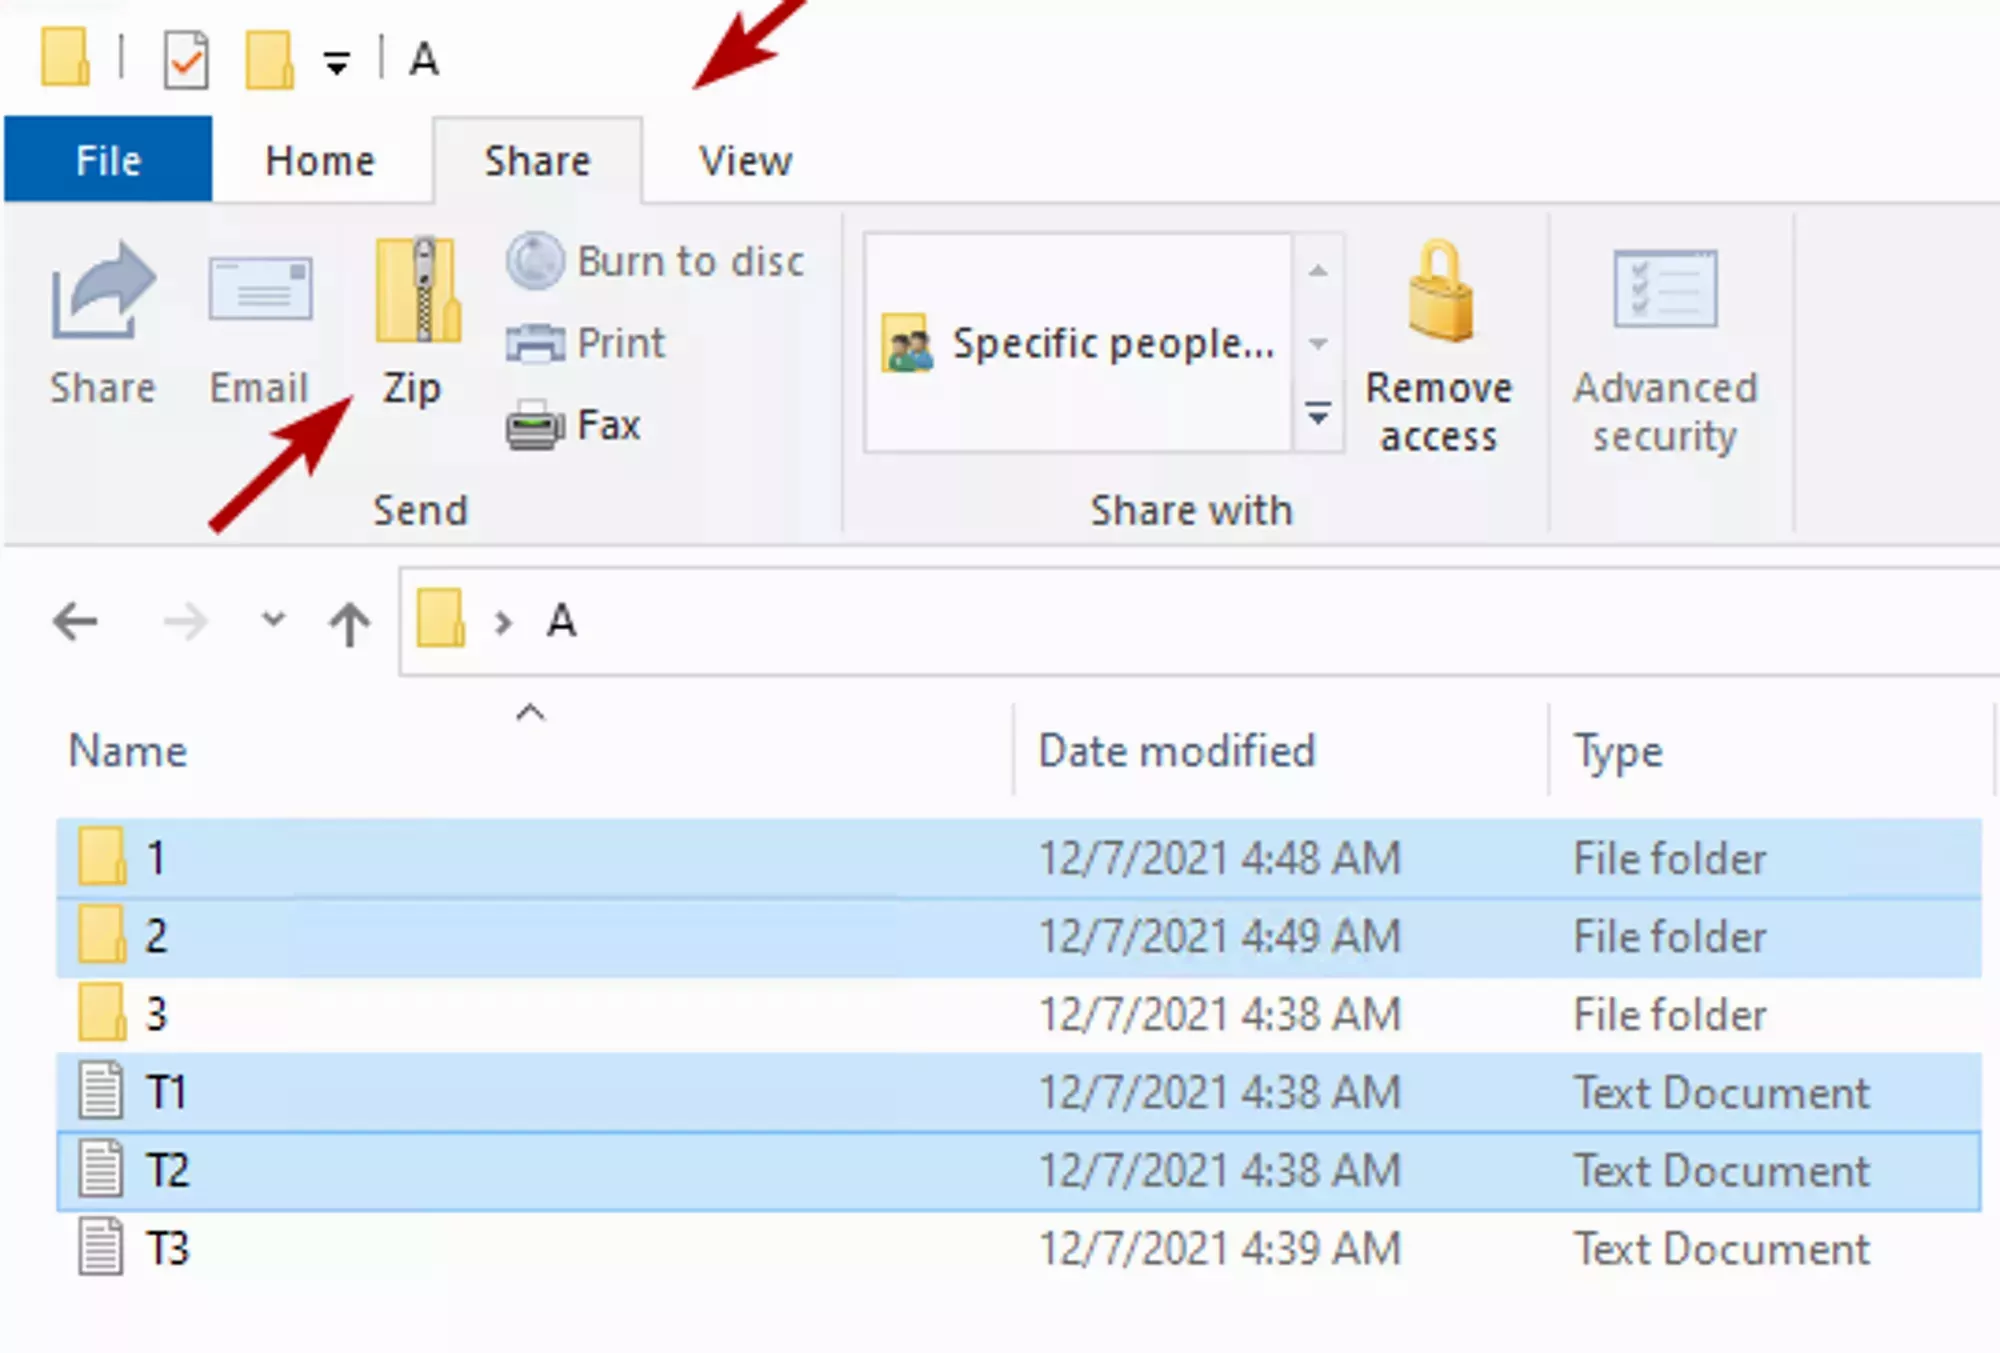 The windows file explorer with folders 1 &amp; 2 and files T1 &amp; T2 selected, while highlighting the position of the &quot;share&quot; tab, second from the left, and the &quot;Zip&quot; button, located under the share tab third from the left.